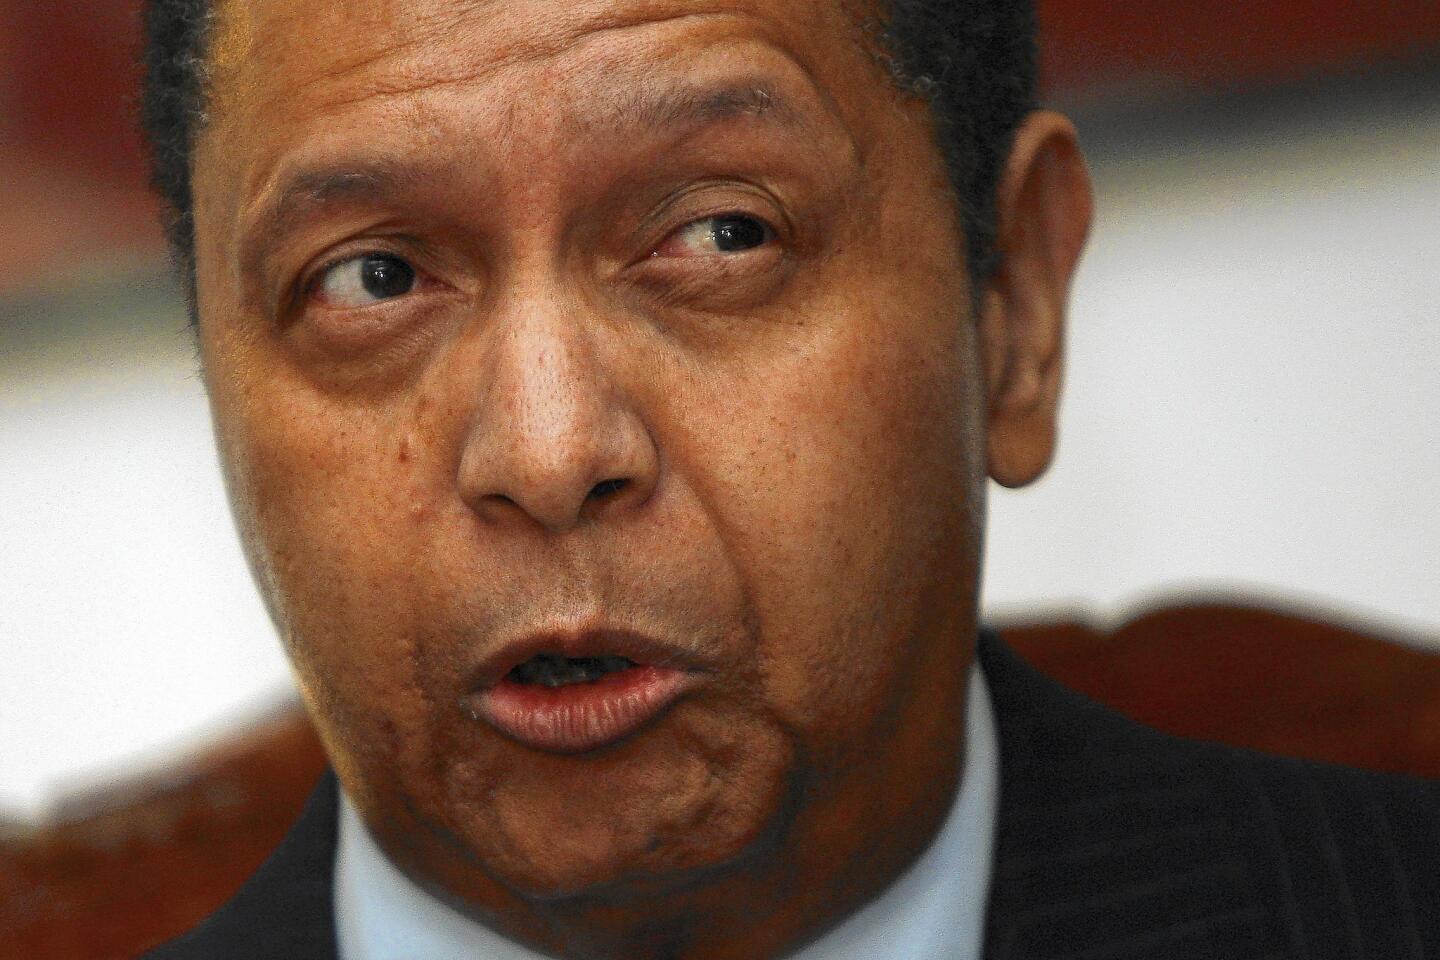 Former Haitian dictator Jean-Claude "Baby Doc" Duvalier speaks at a news conference in 2011, the year he returned from exile. He died Oct. 4 in Port-au-Prince at the age of 63.